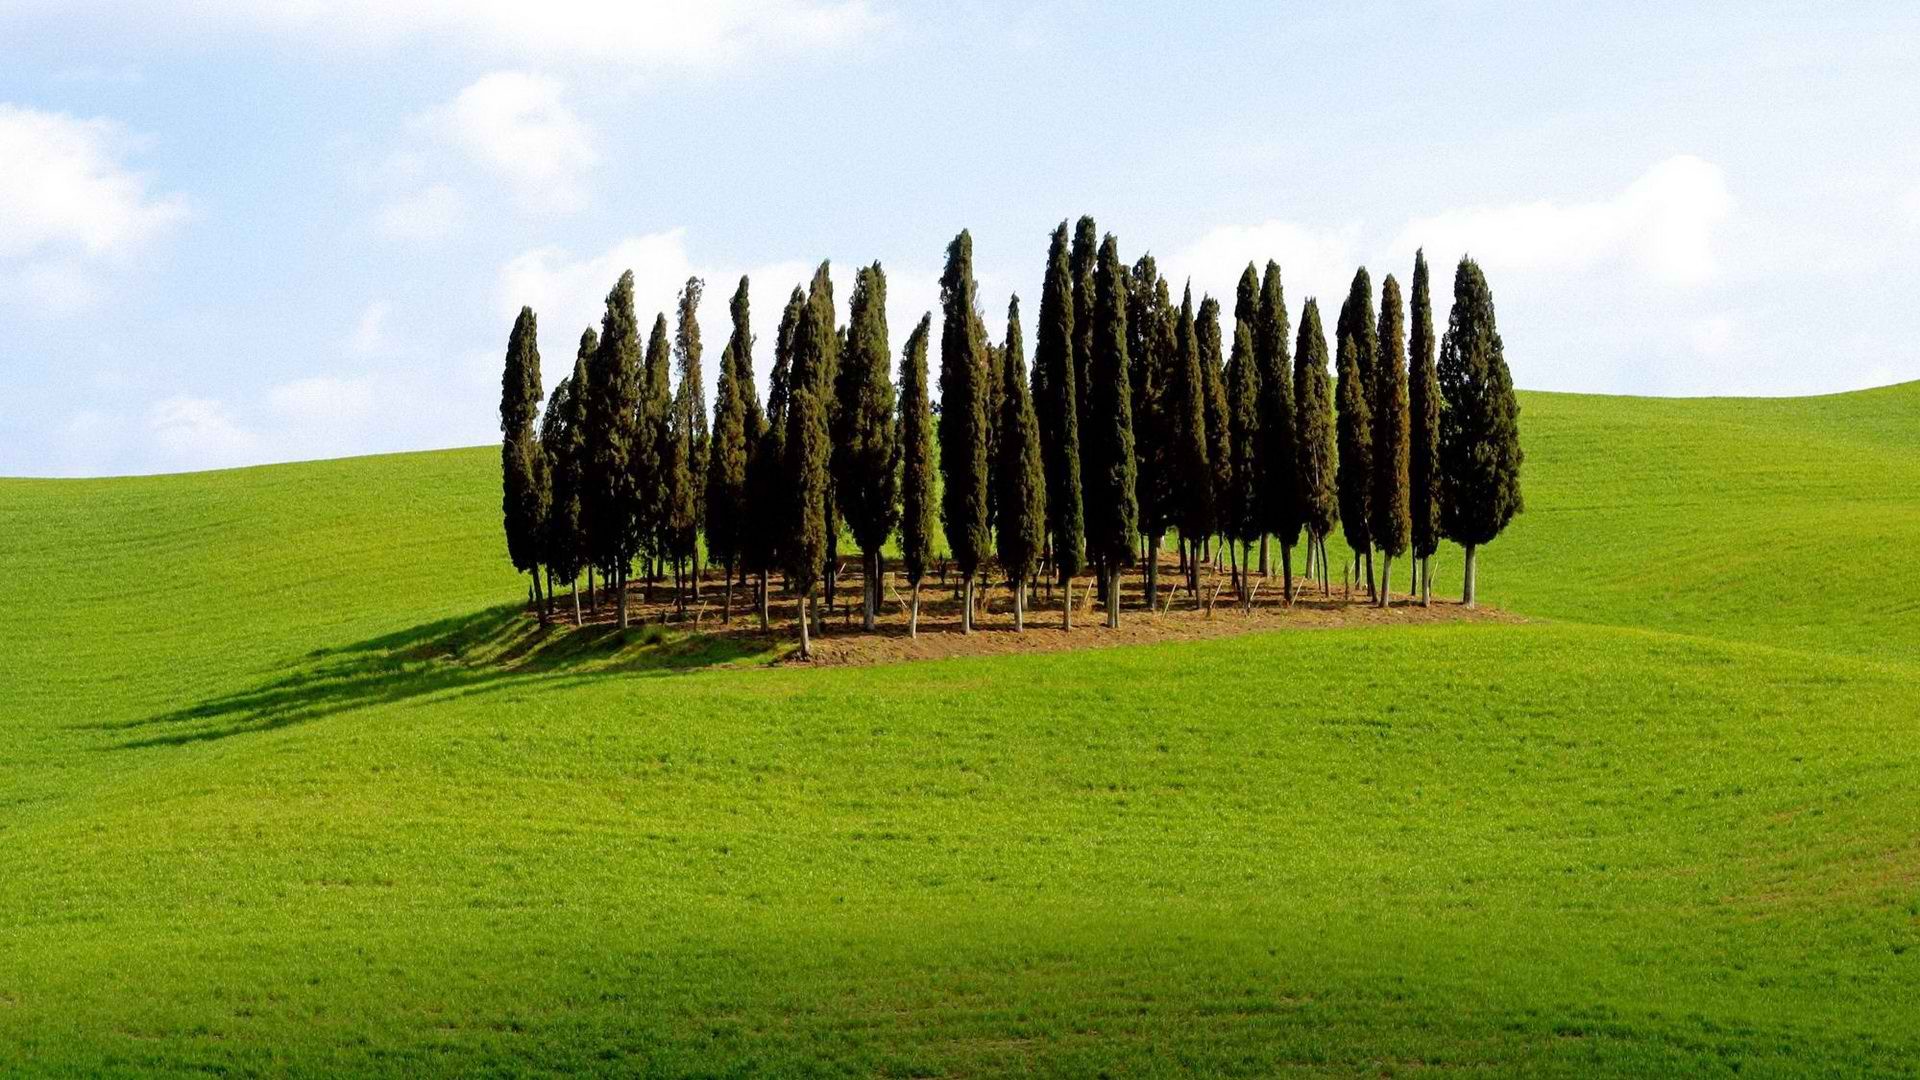 Group of trees in a field wallpaper - 744910